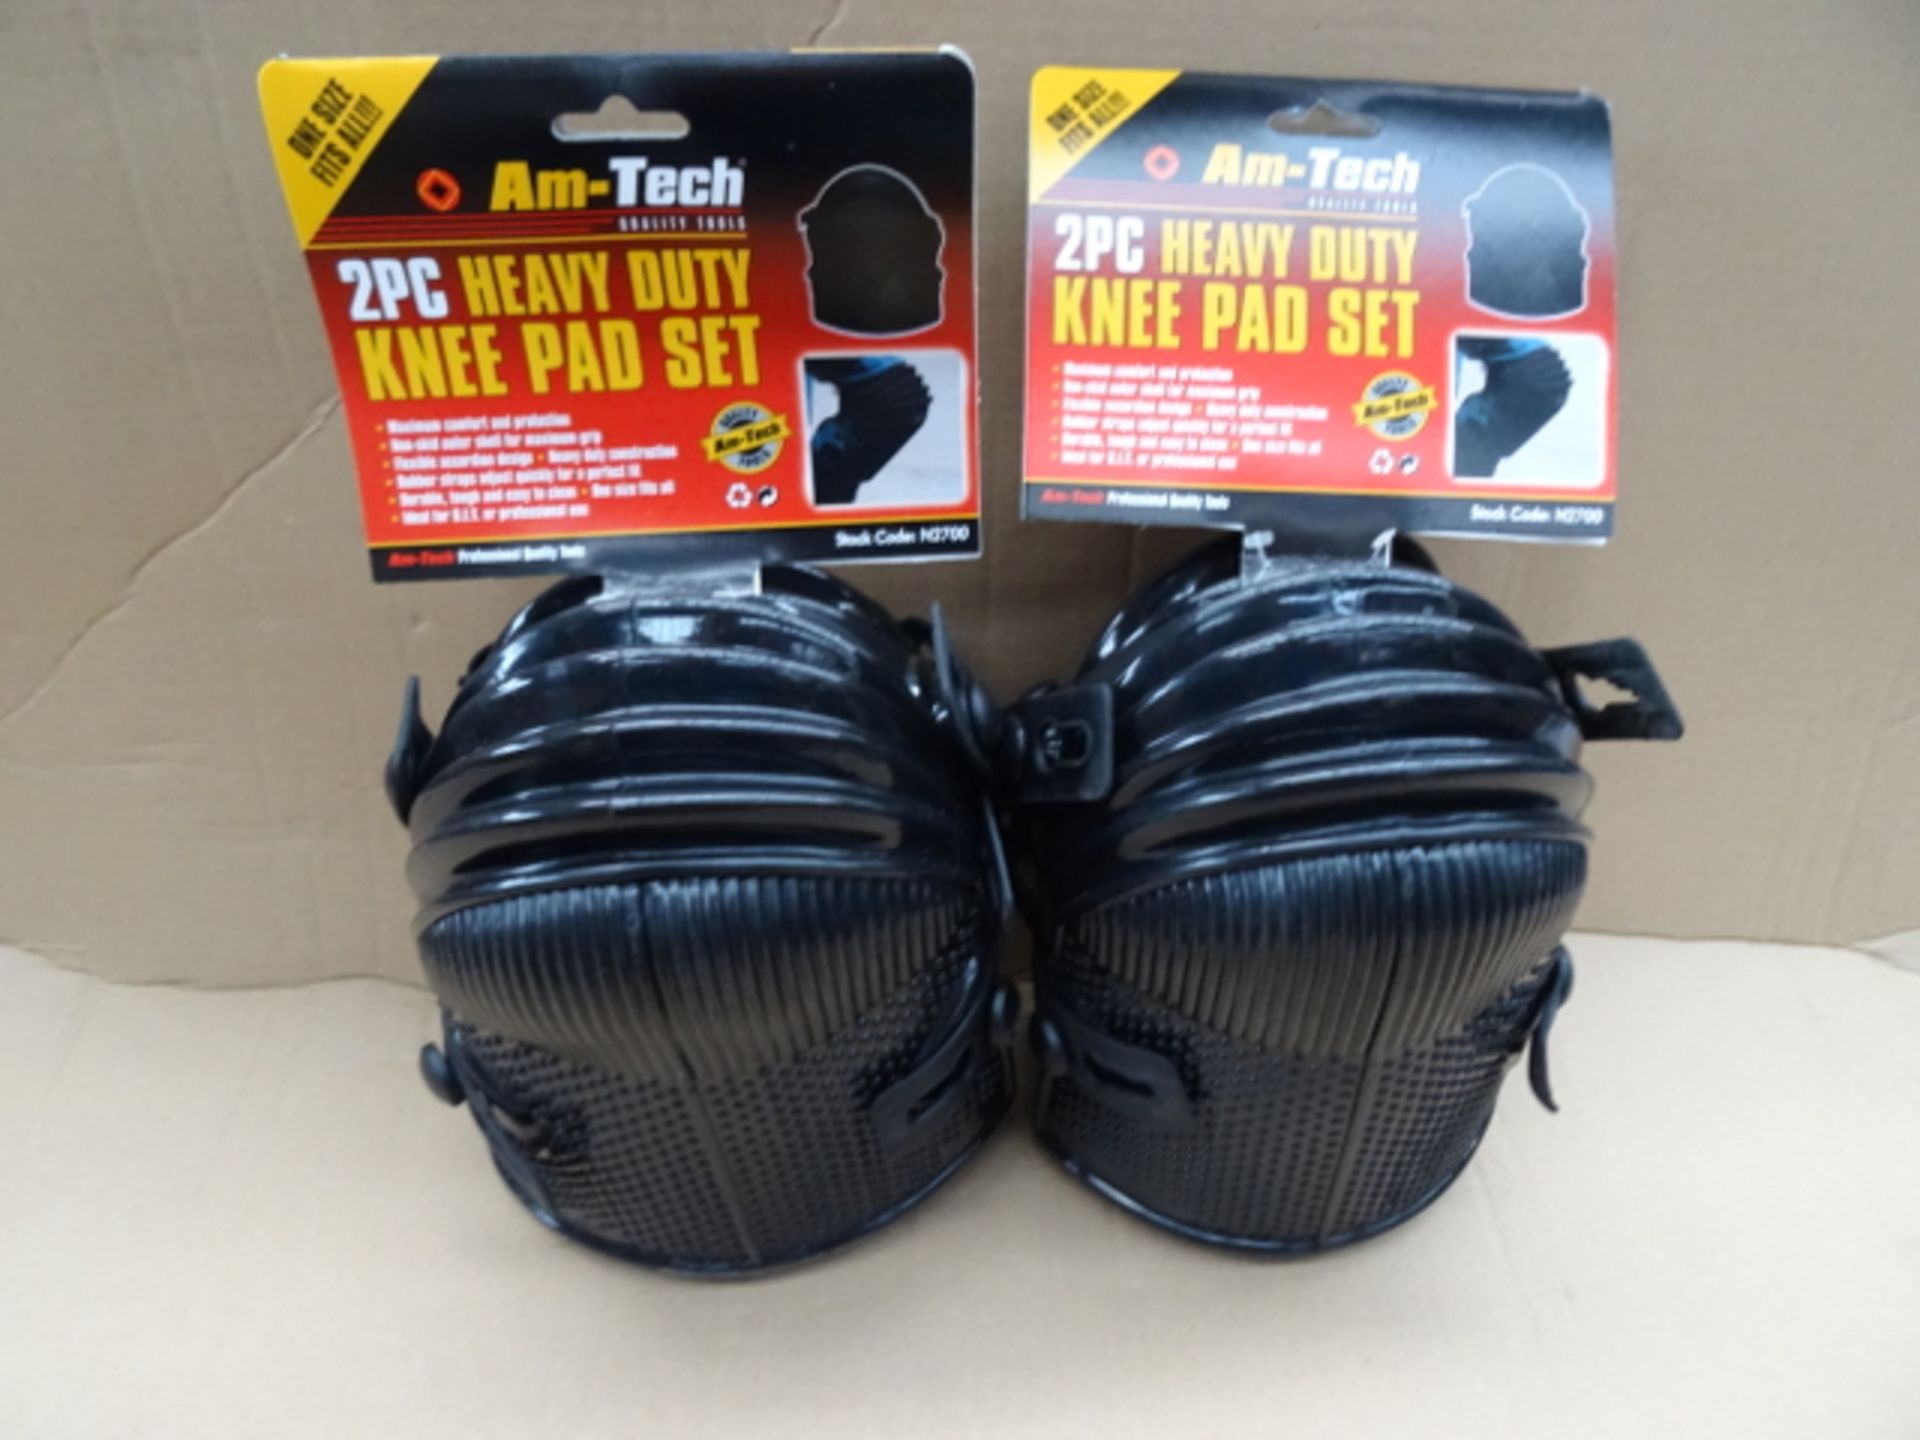 20 x Am-Tech Quality Tools. 2 Piece Heavy Duty Knee Pad Set. One Size fits all. Very high quality!